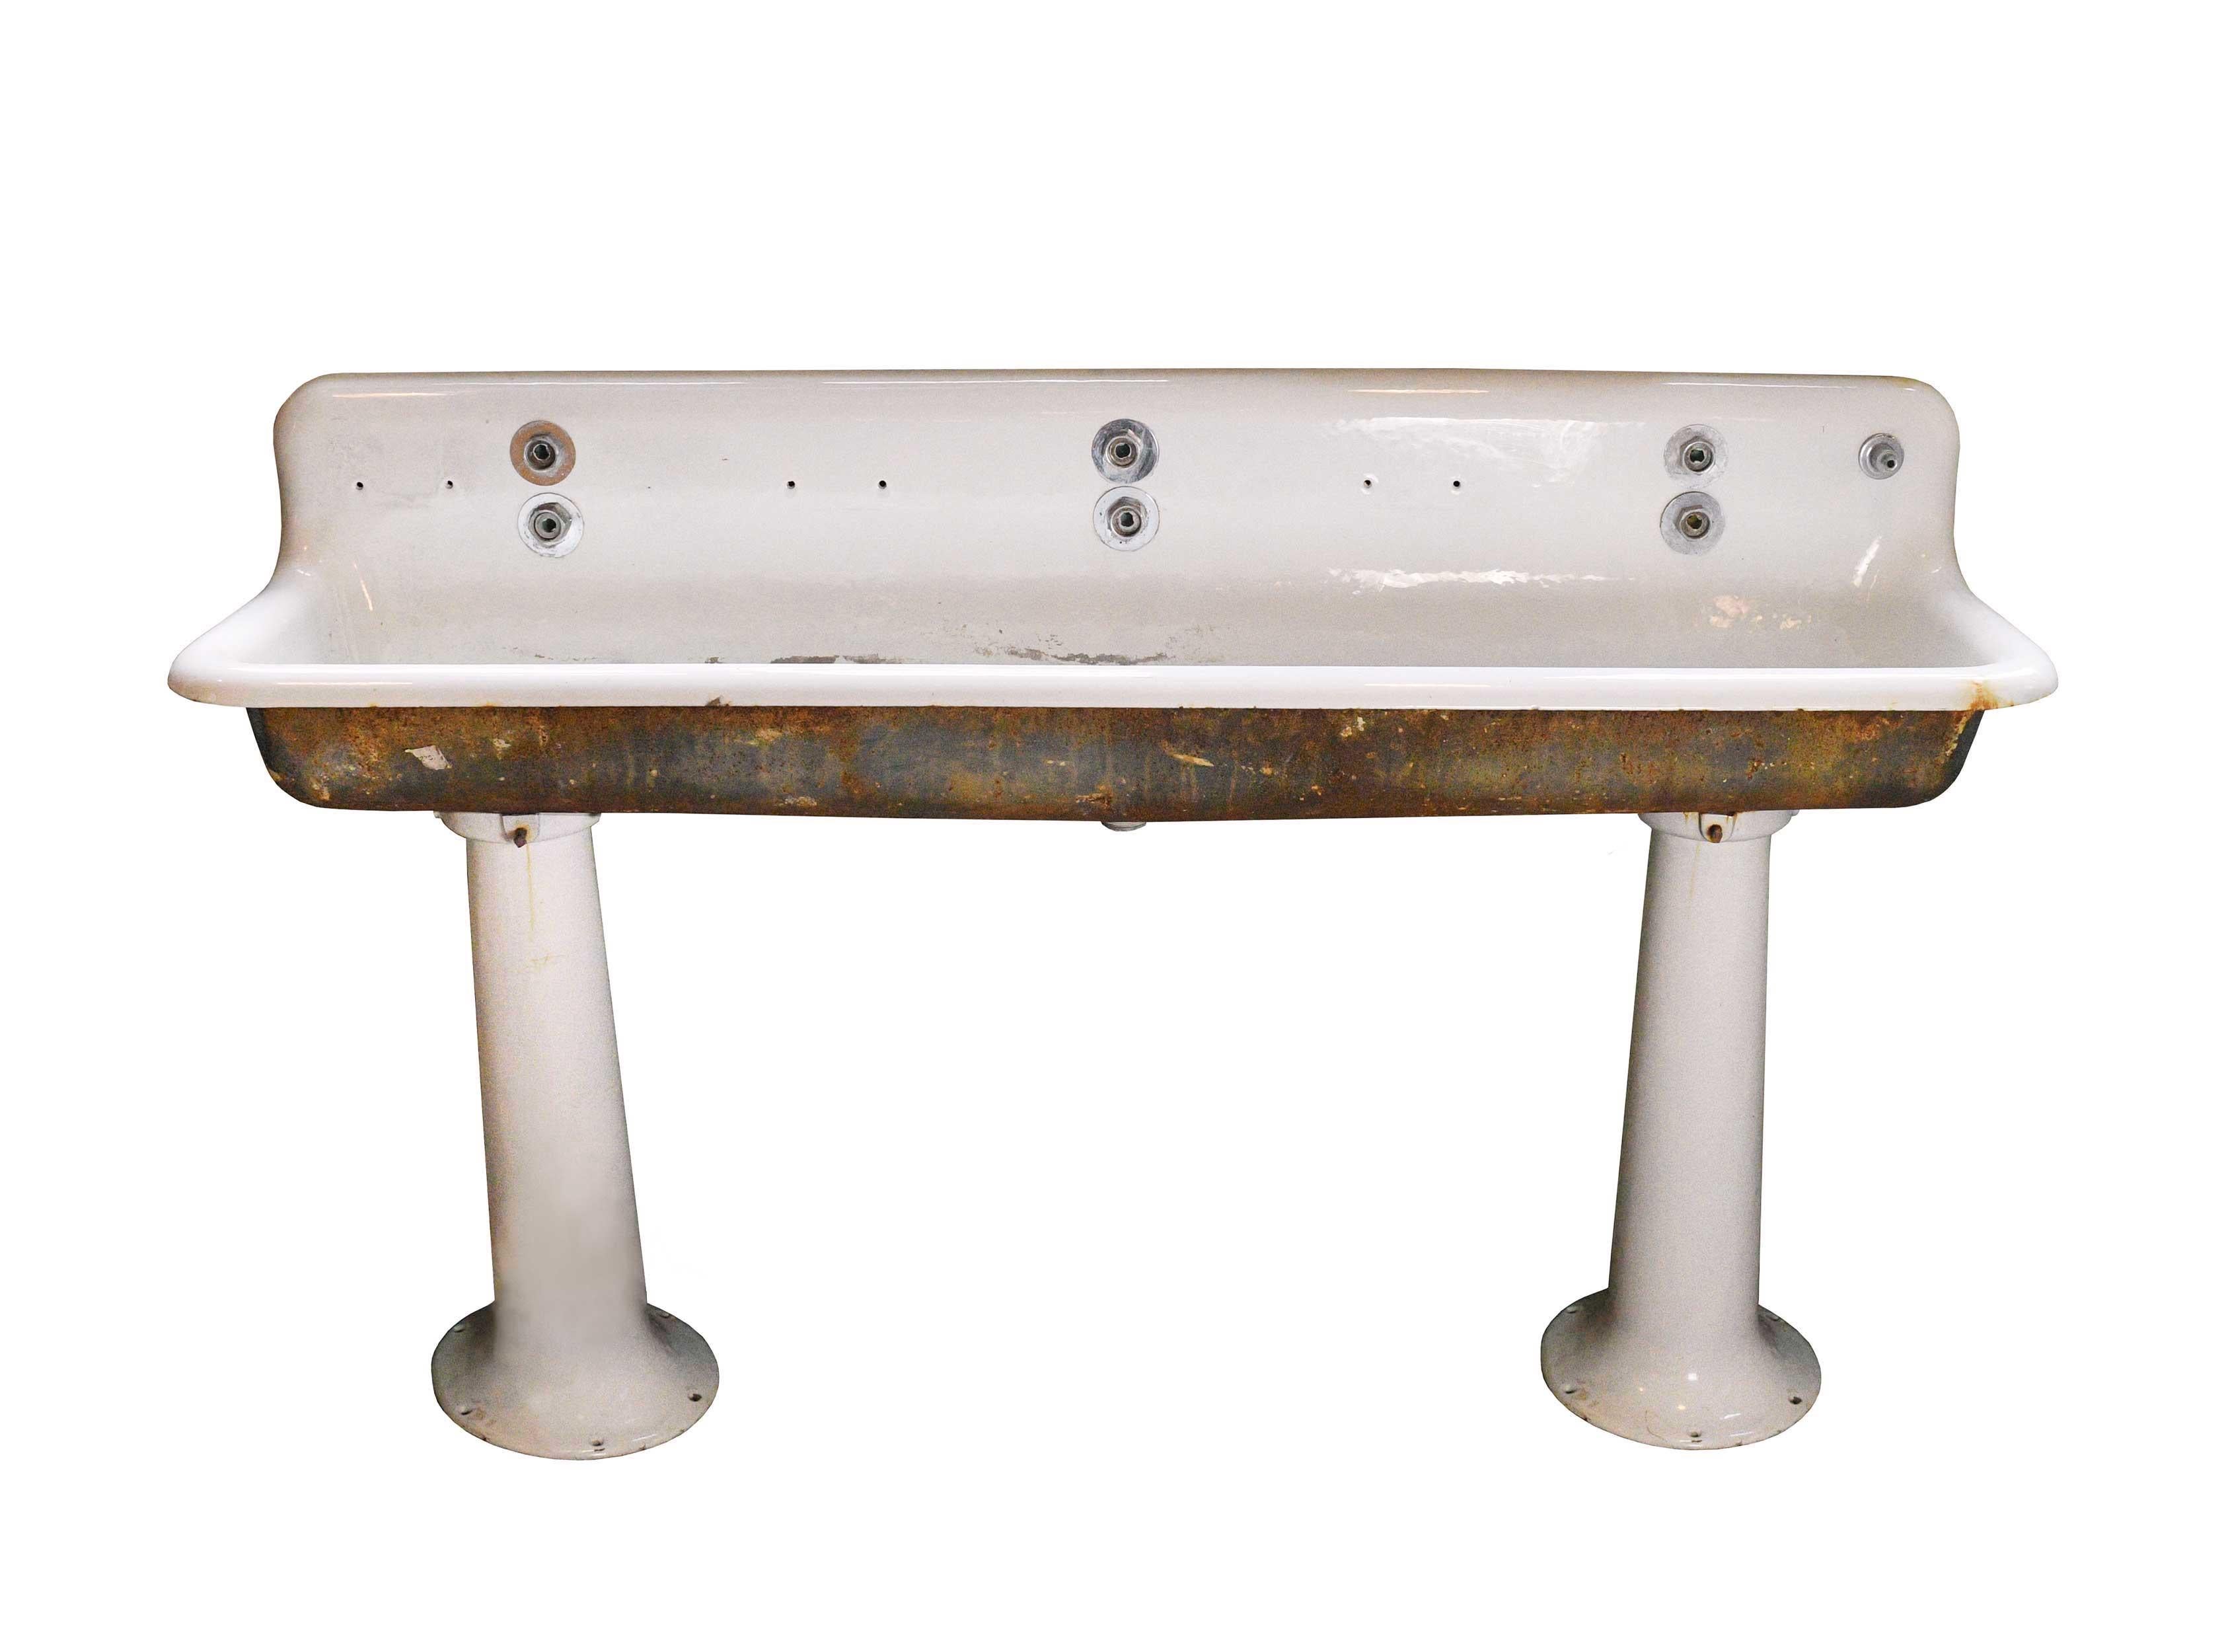 A large, Classic standard six foot porcelain sink with back splash and two legs. Perfect for adding a rustic, farmhouse look to any space. 

circa 1930
Condition: Good
Finish: Original
Country of origin: USA

Overall measurements: 72